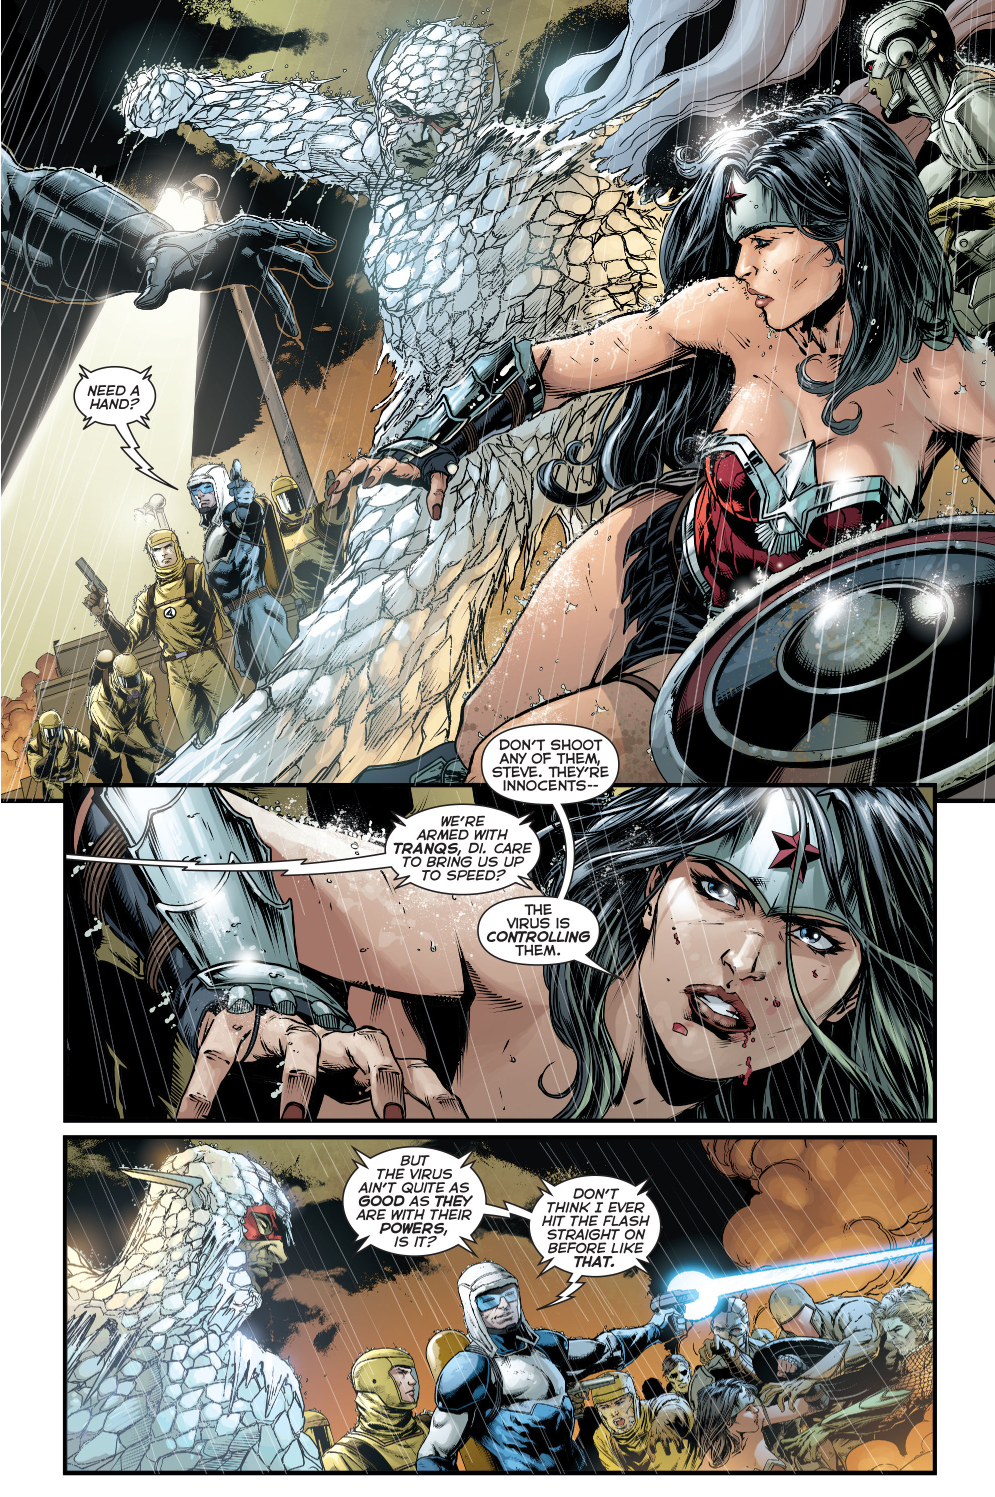 wonder woman and captain cold vs infected justice league